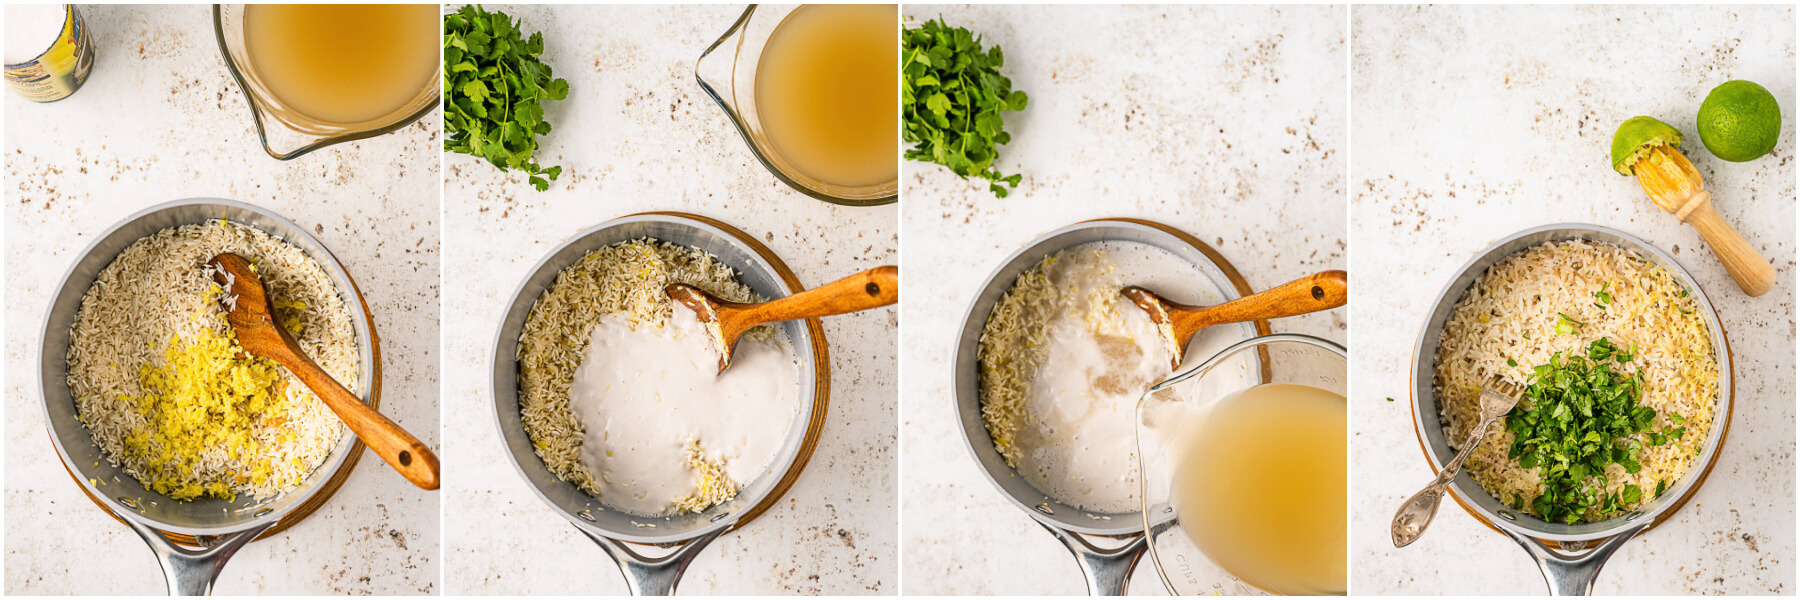 Process images showing how to fry aromatics and how to cook Ginger Rice.